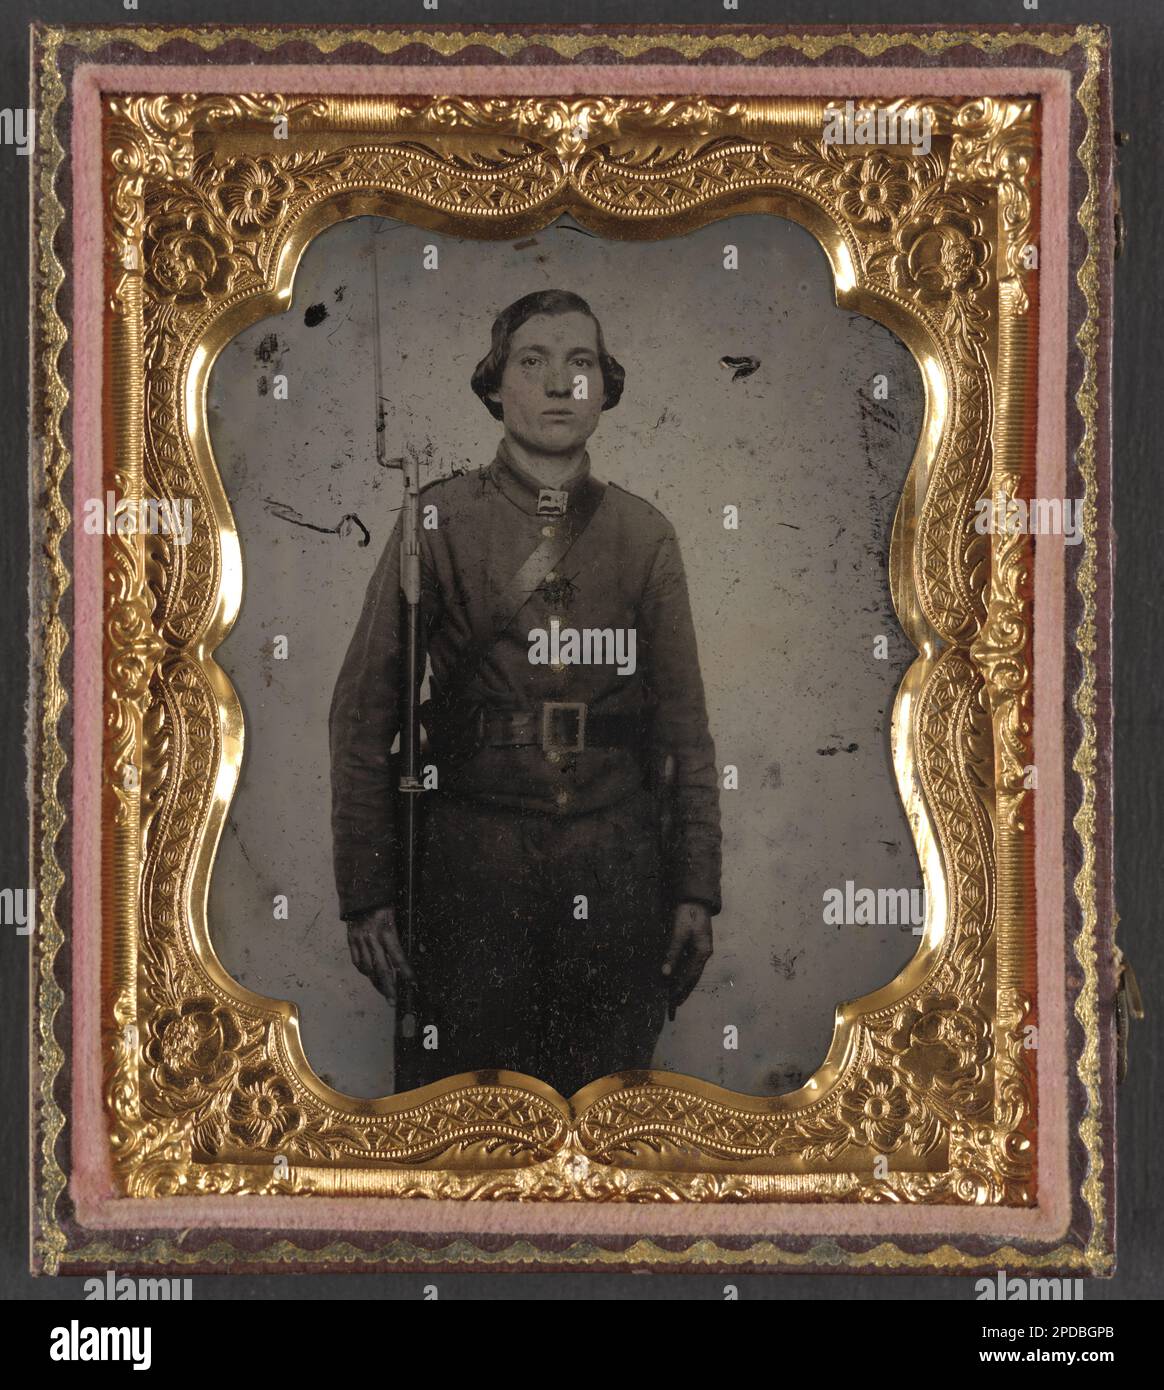 Unidentified soldier in Confederate uniform and Georgia frame belt buckle with bayoneted musket. Liljenquist Family Collection of Civil War Photographs , FAmbrotype/Tintype photograph filing series , pp/liljconfed. Confederate States of America, Army, People, 1860-1870, Soldiers, Confederate, 1860-1870, Military uniforms, Confederate, 1860-1870, Rifles, 1860-1870, Bayonets, 1860-1870, United States, History, Civil War, 1861-1865, Military personnel, Confederate. Stock Photo